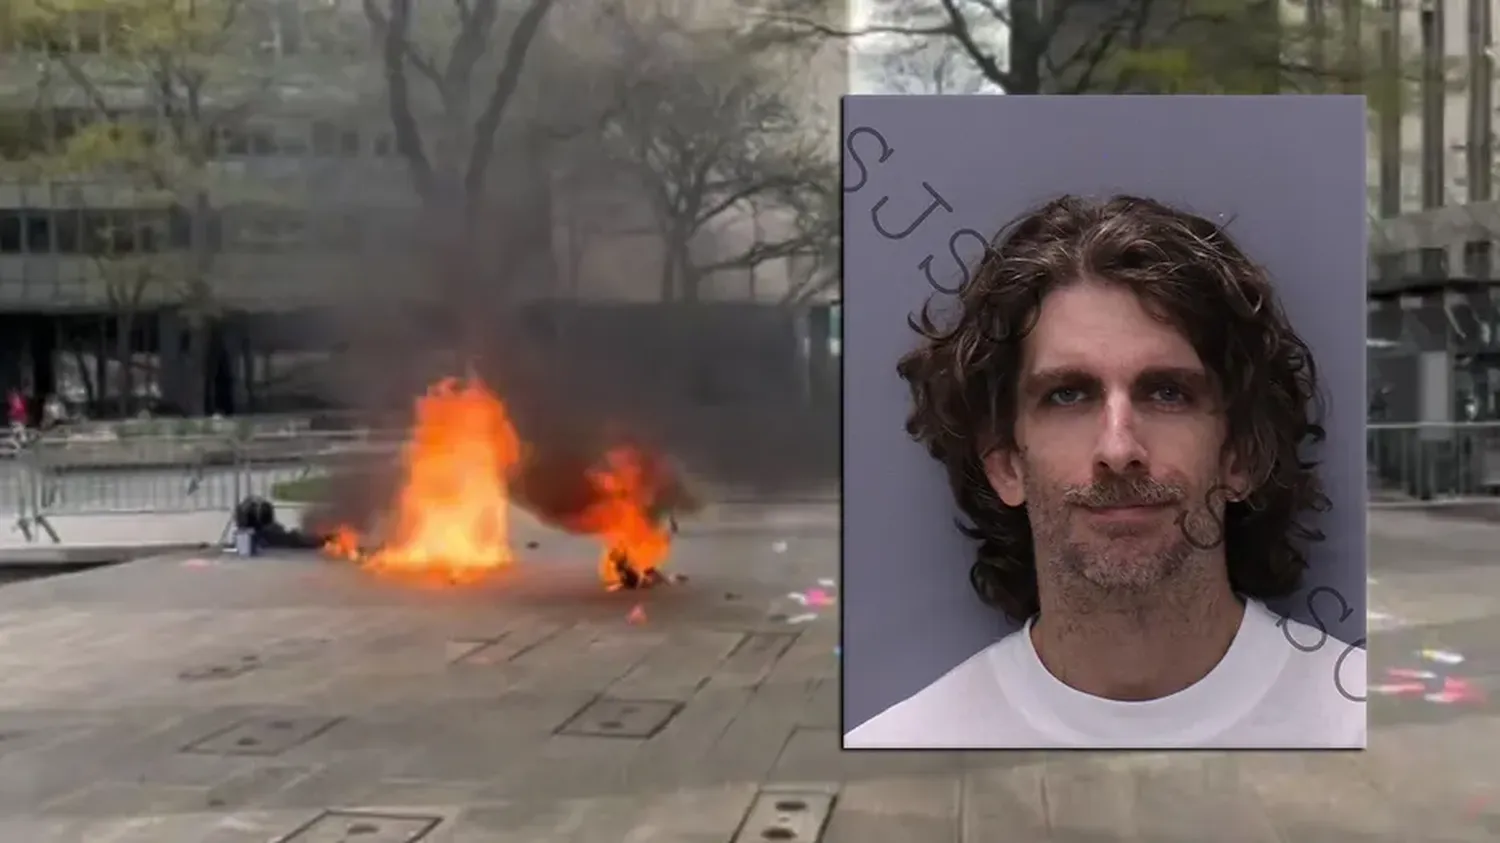 Max Azzarello set himself on fire outside of the NYC courthouse where Trump trial jurors were selected, police said.